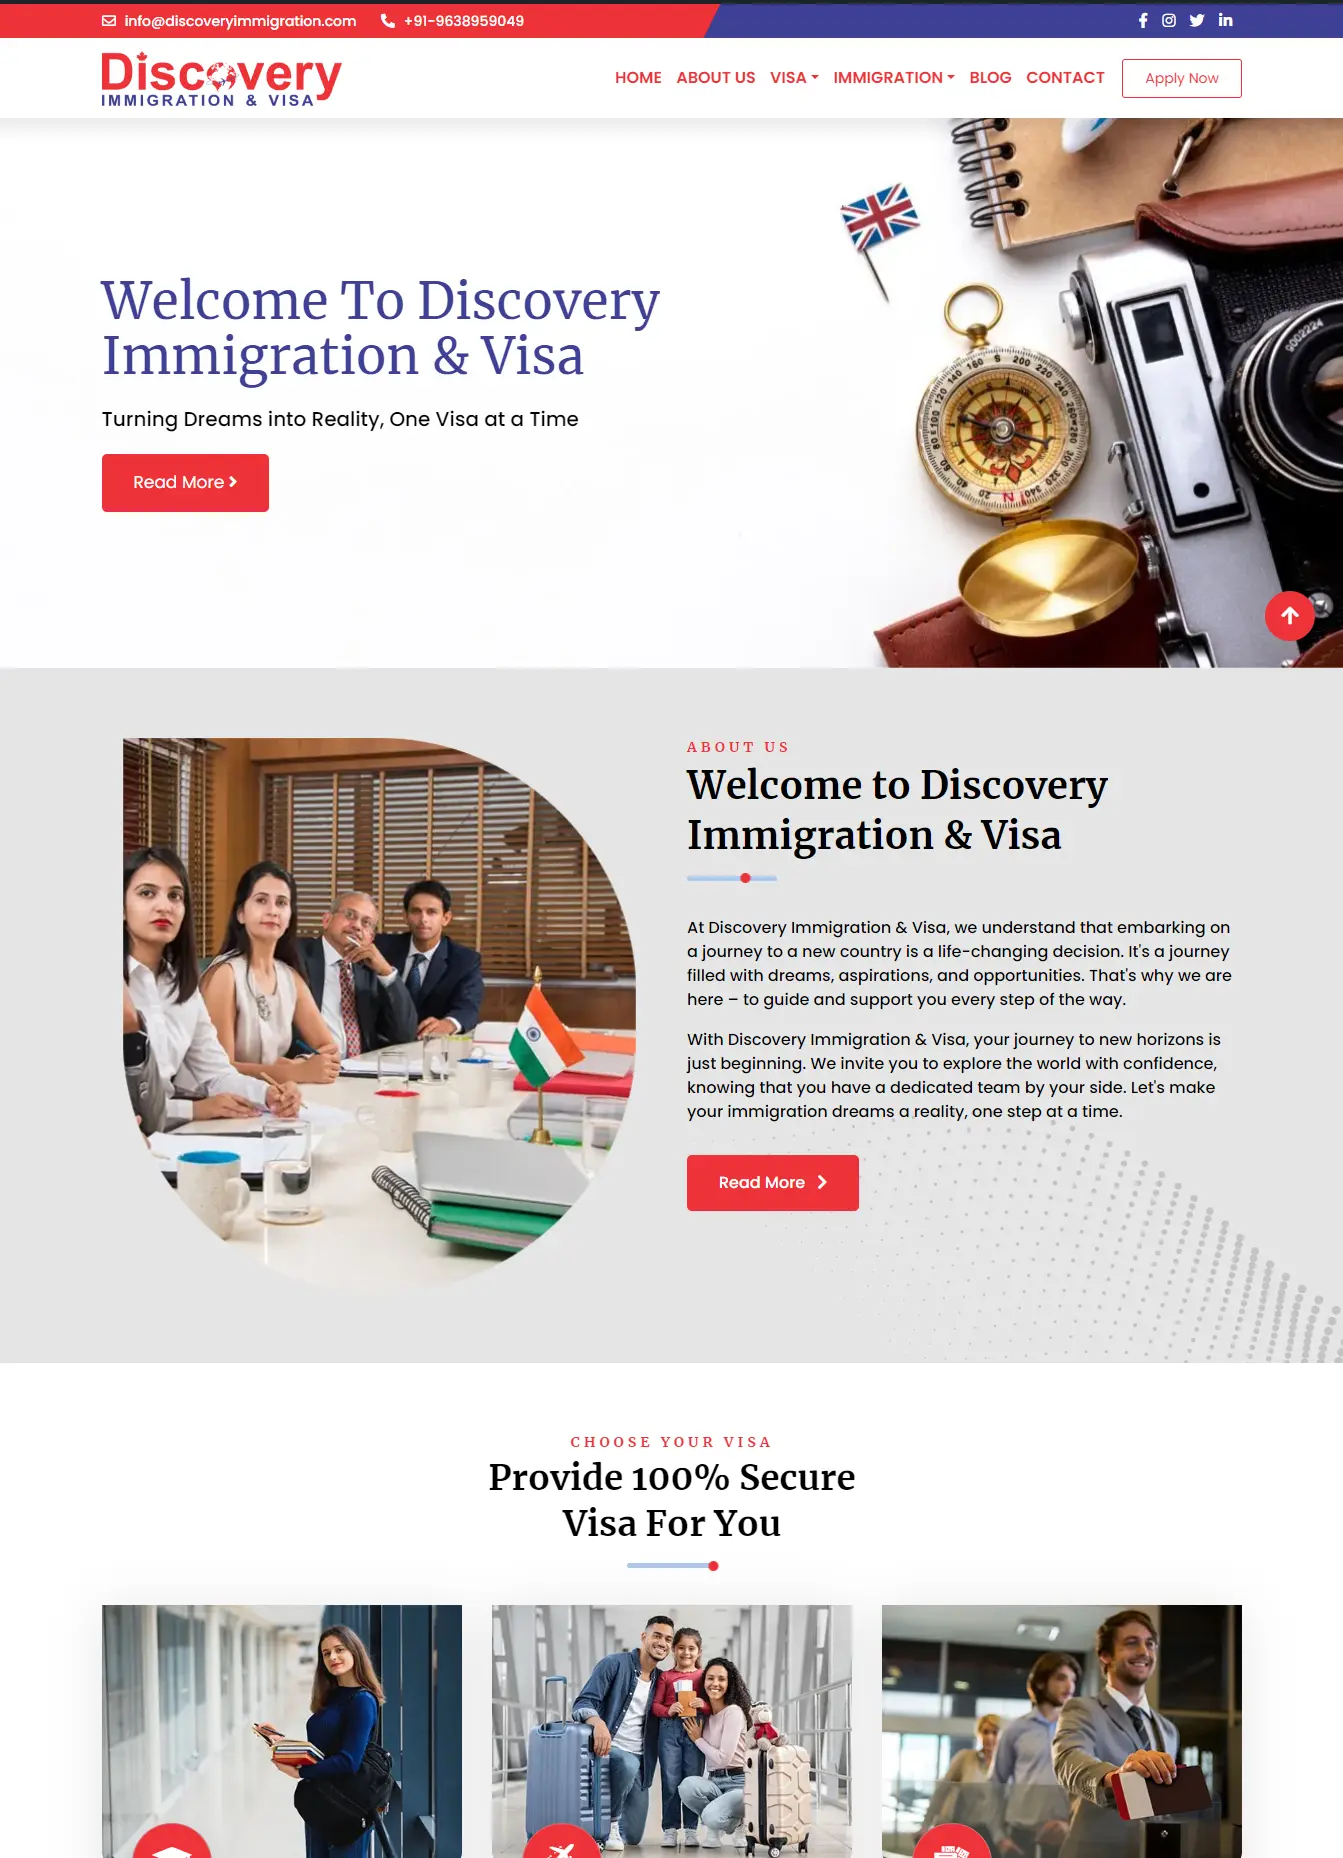 Discovery Immigration & Visa